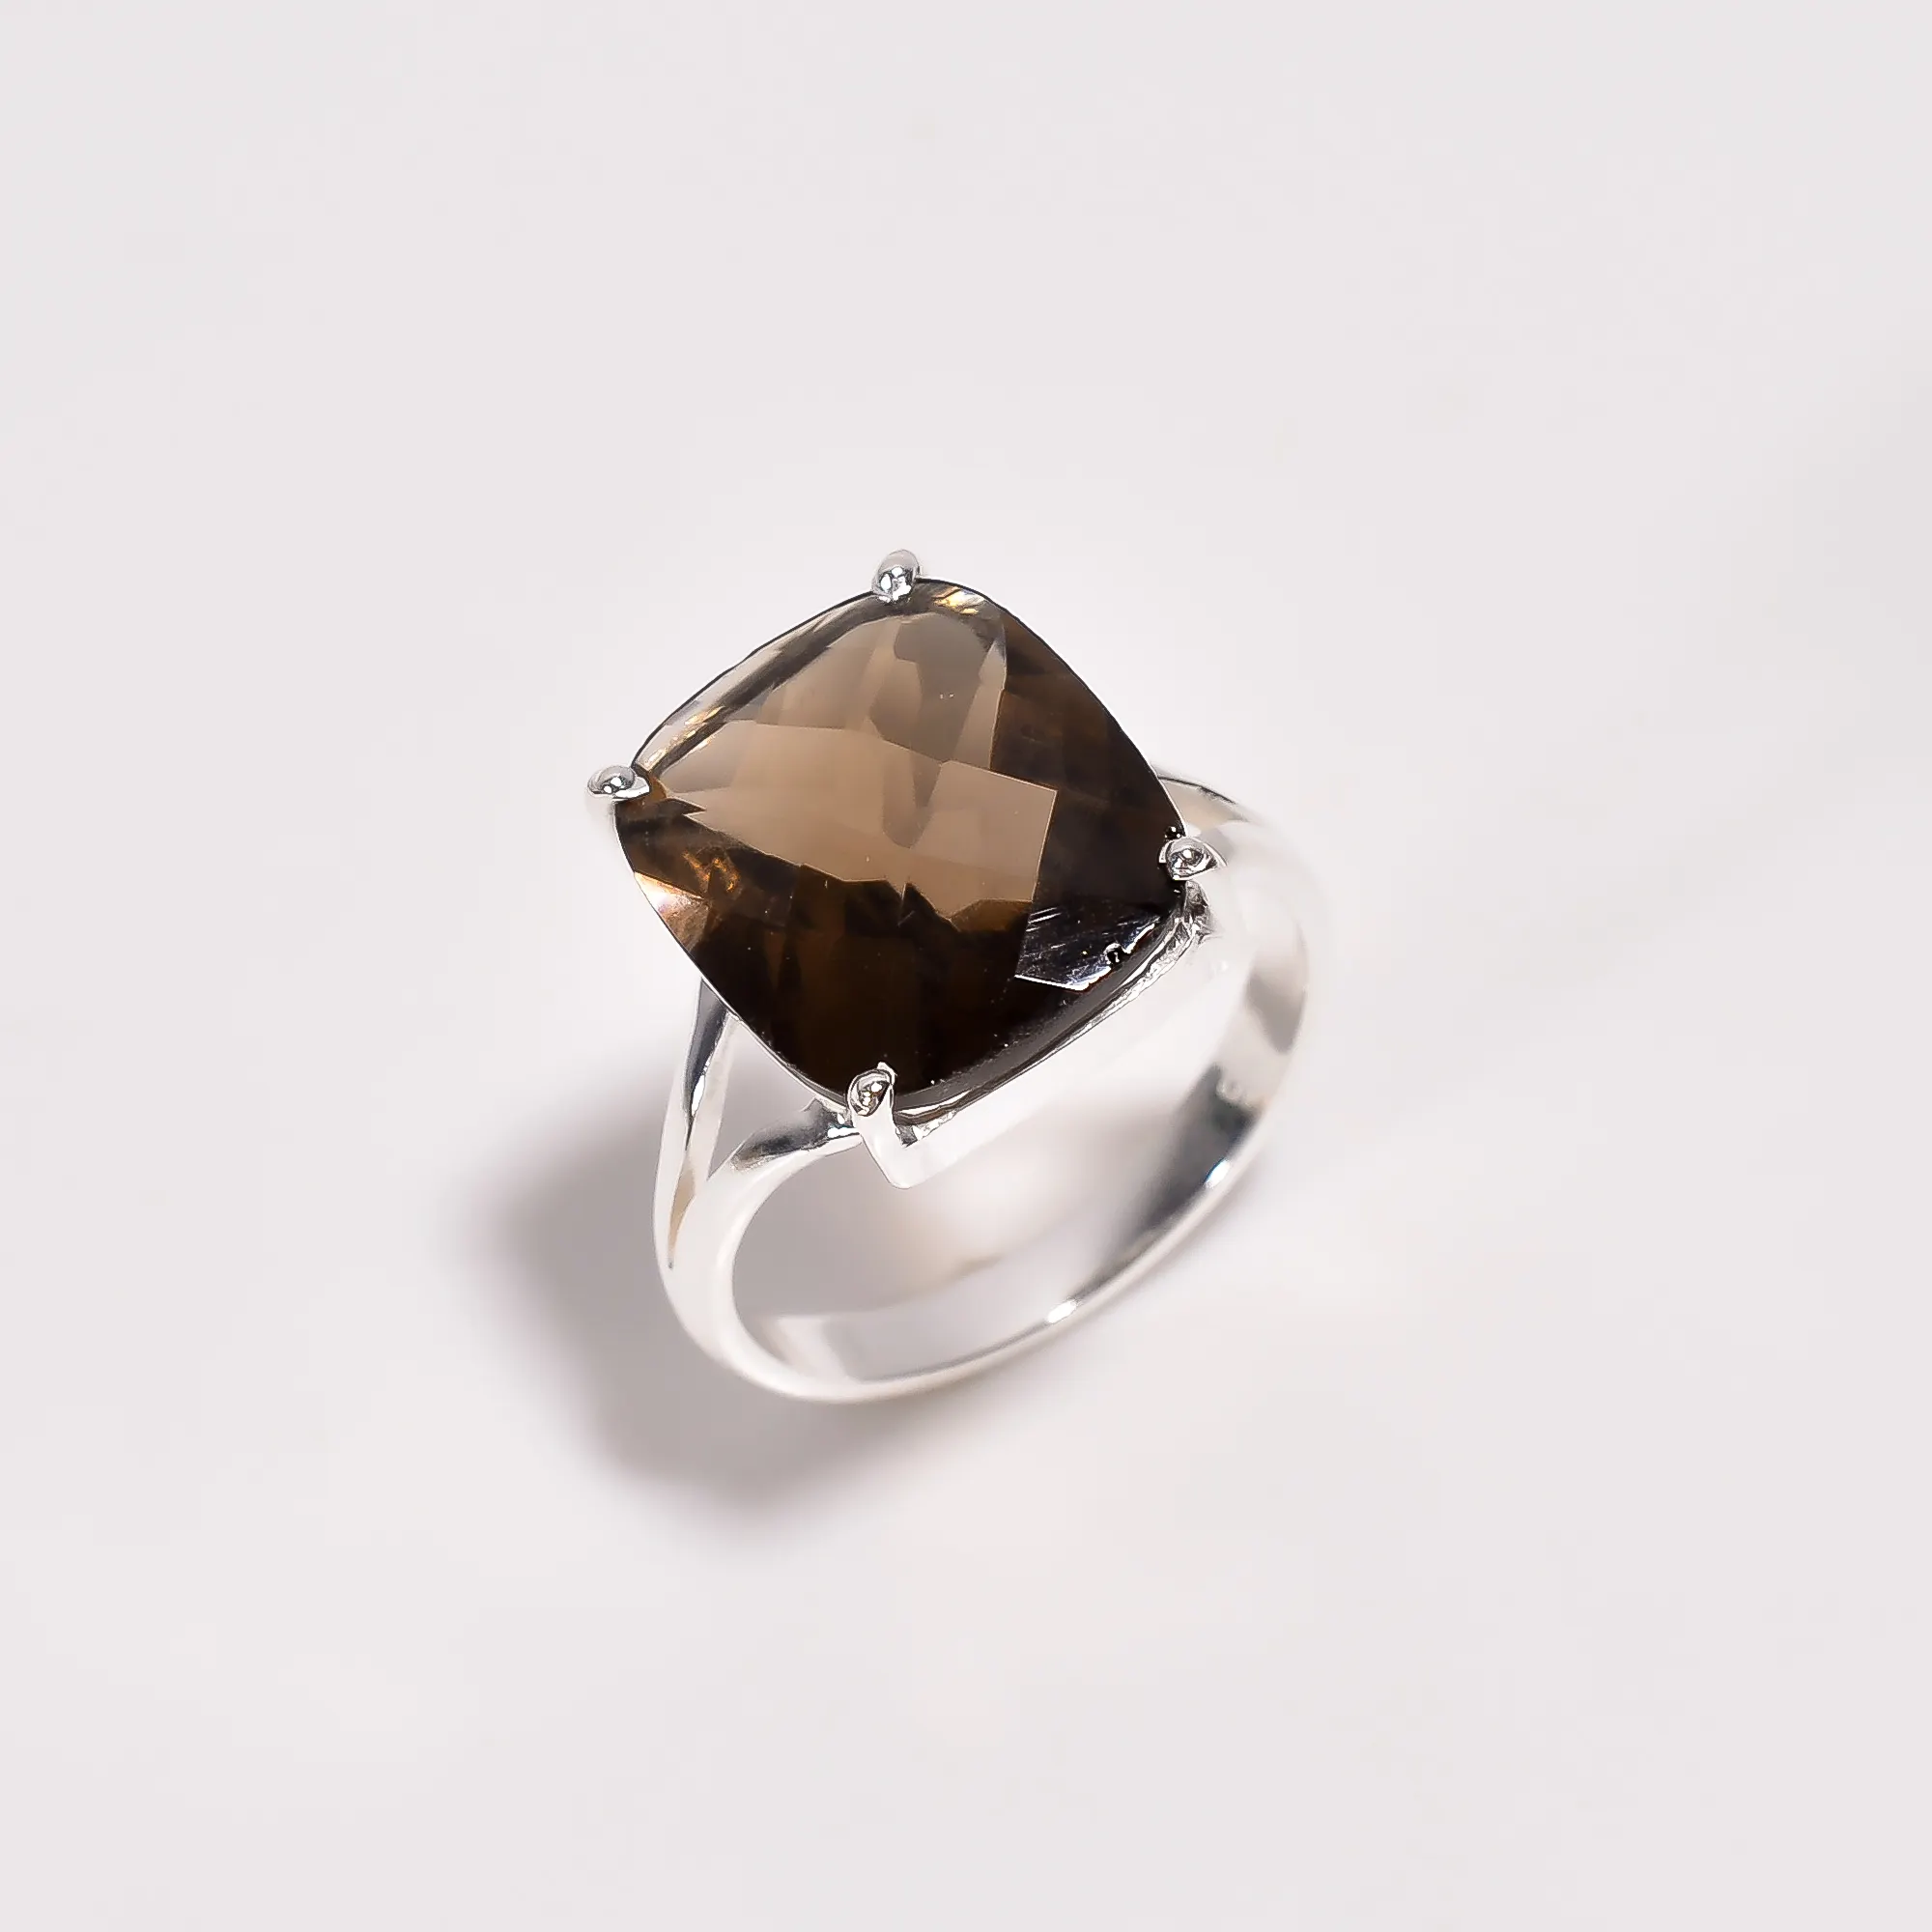 Wholesale Price Solid Silver Jewelry 925 Sterling Silver Smoky Quartz Natural Gemstone Prong Setting Brown Quartz Ring